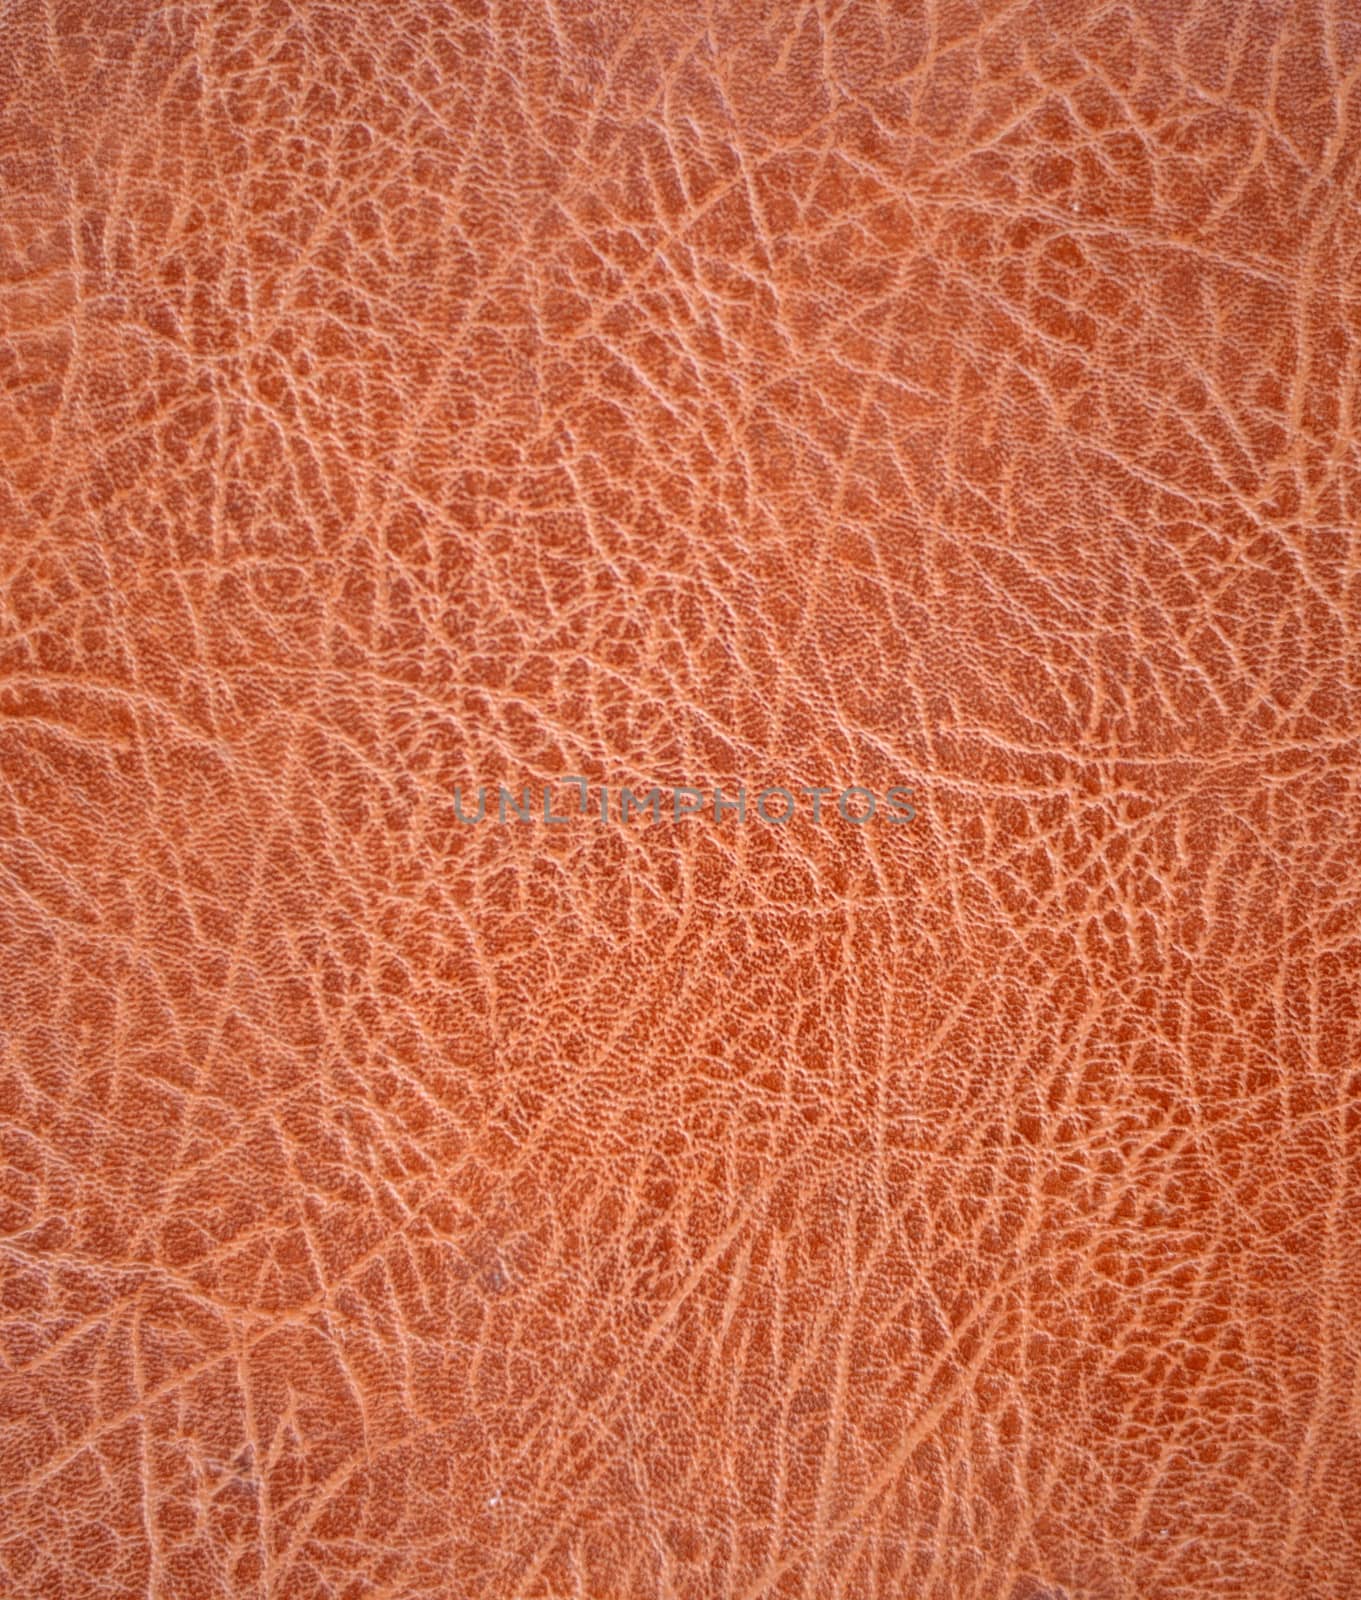 leather texture or background by MalyDesigner